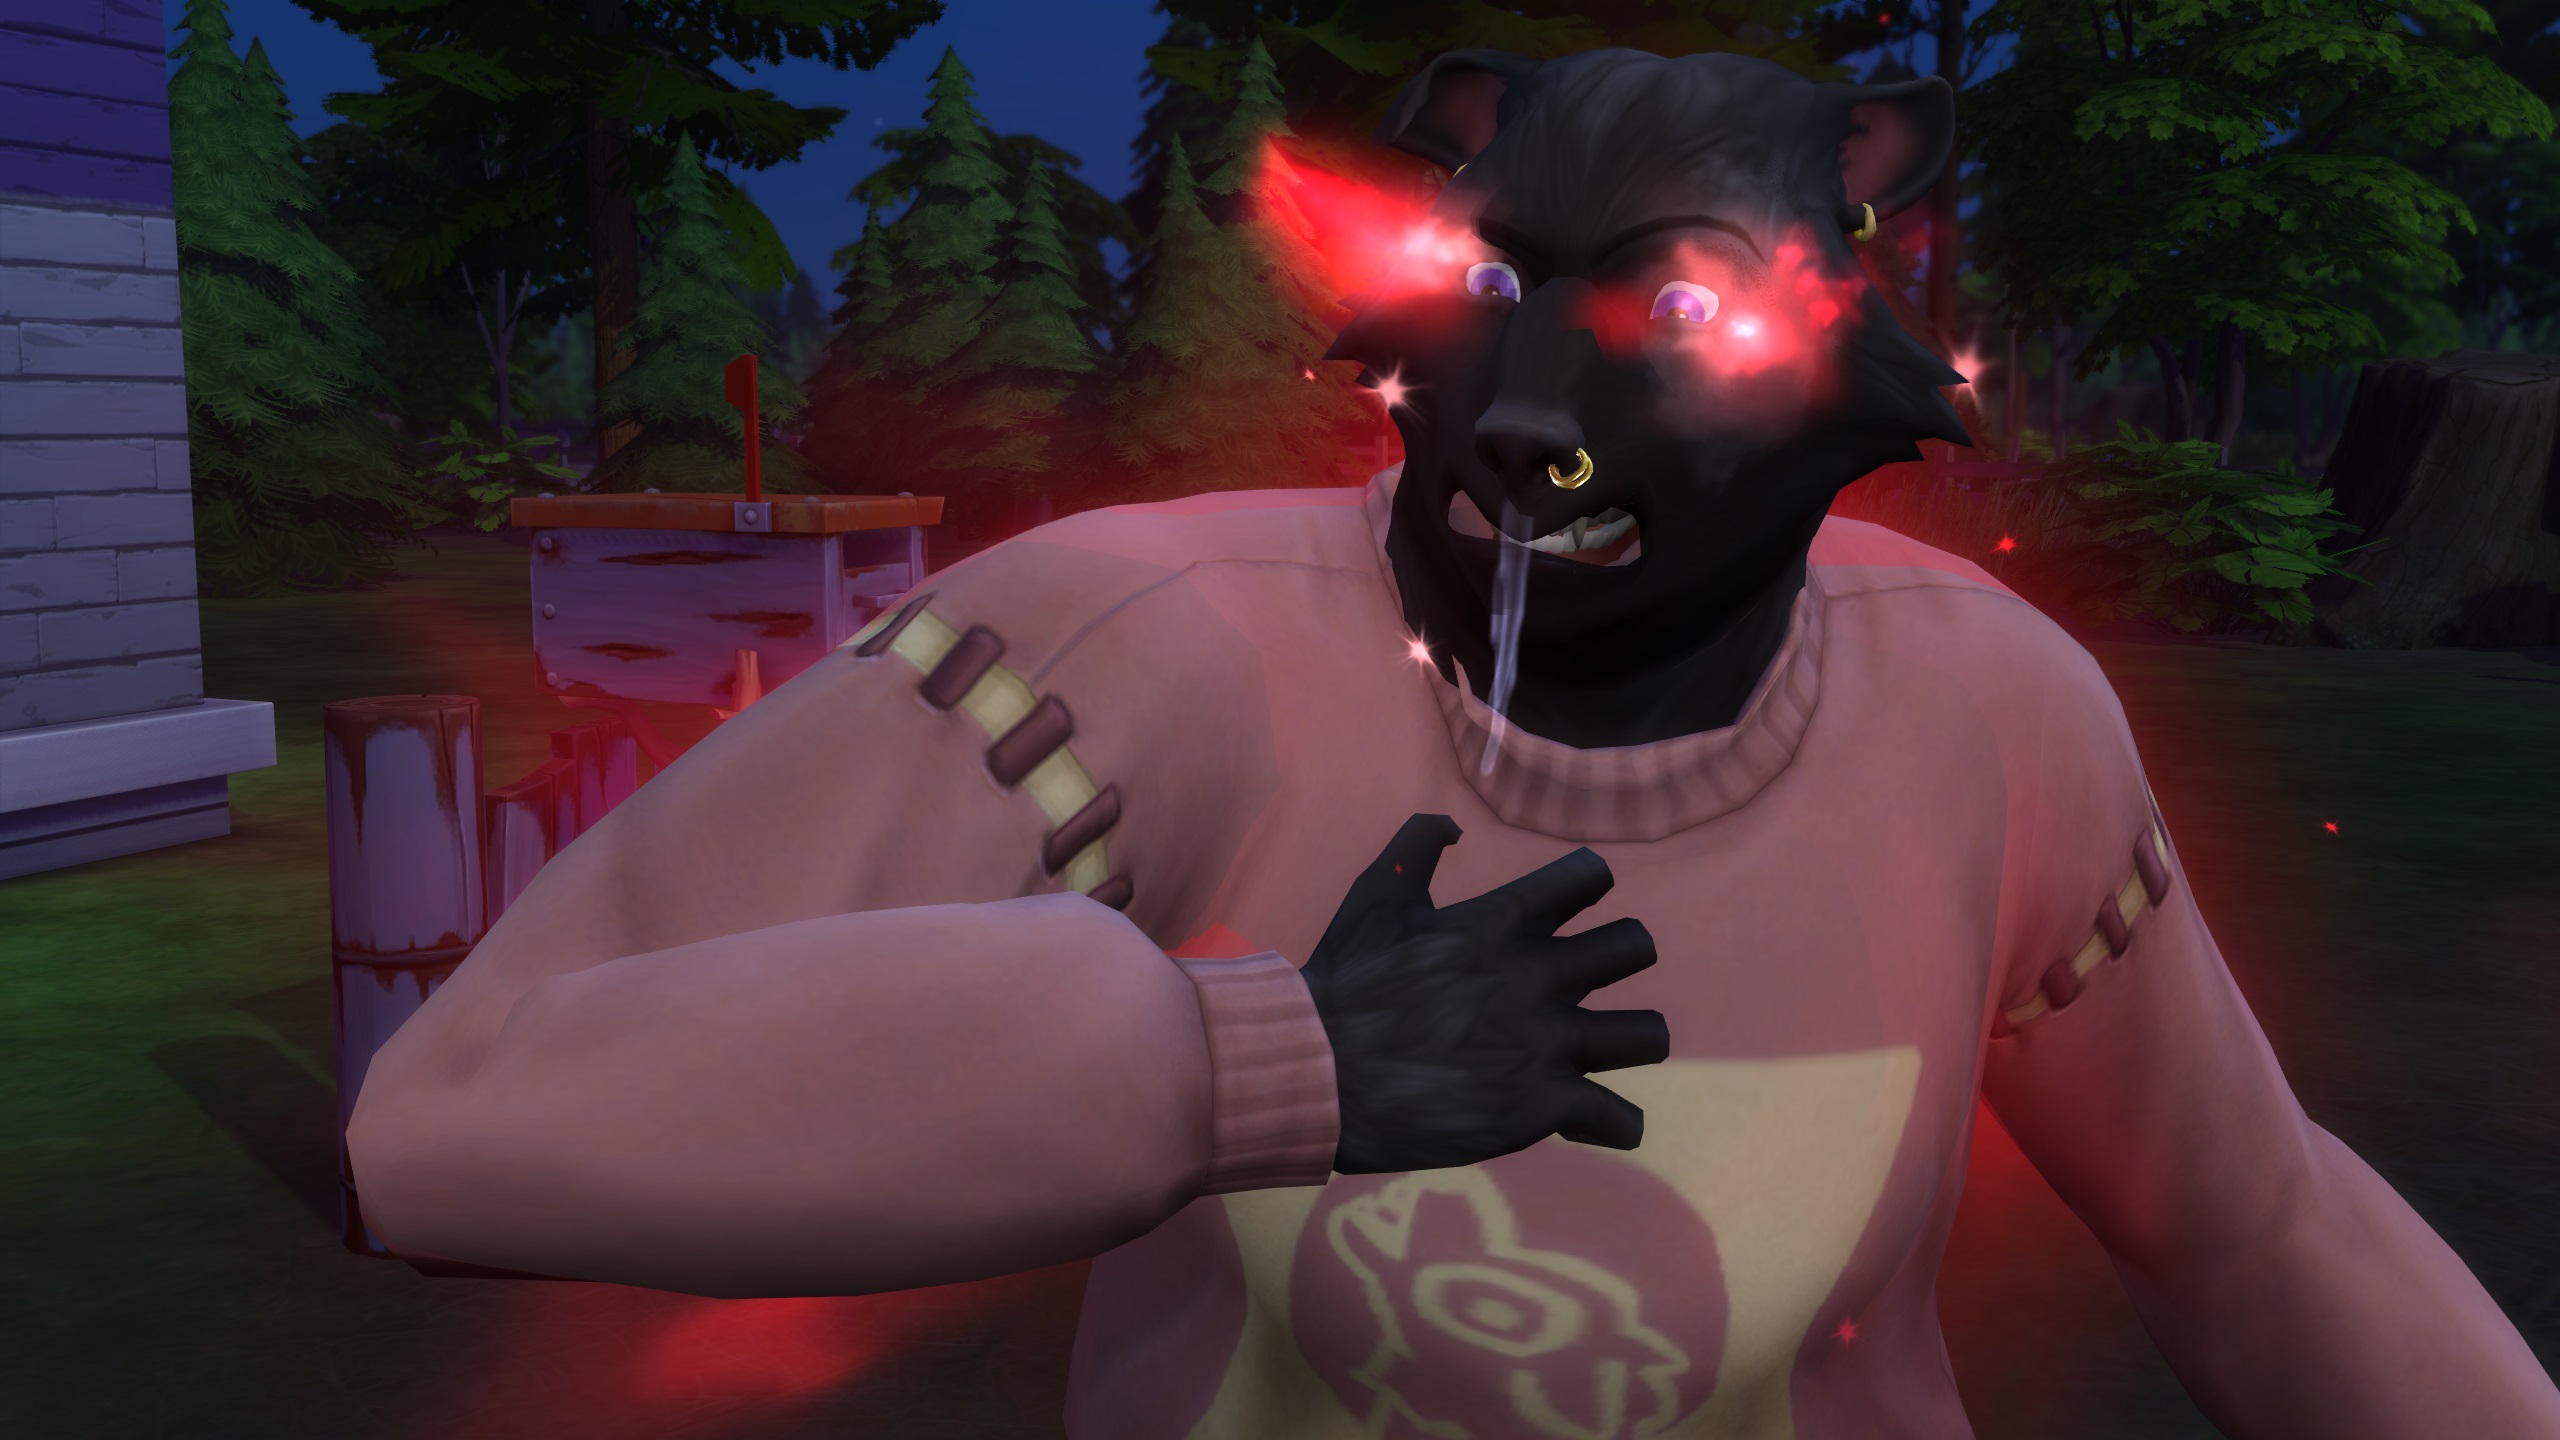 The Sims 4 Werewolves - A Werewolf Sim with black fur has angry glowing red eyes full of rage and drools while wearing a pink sweater.